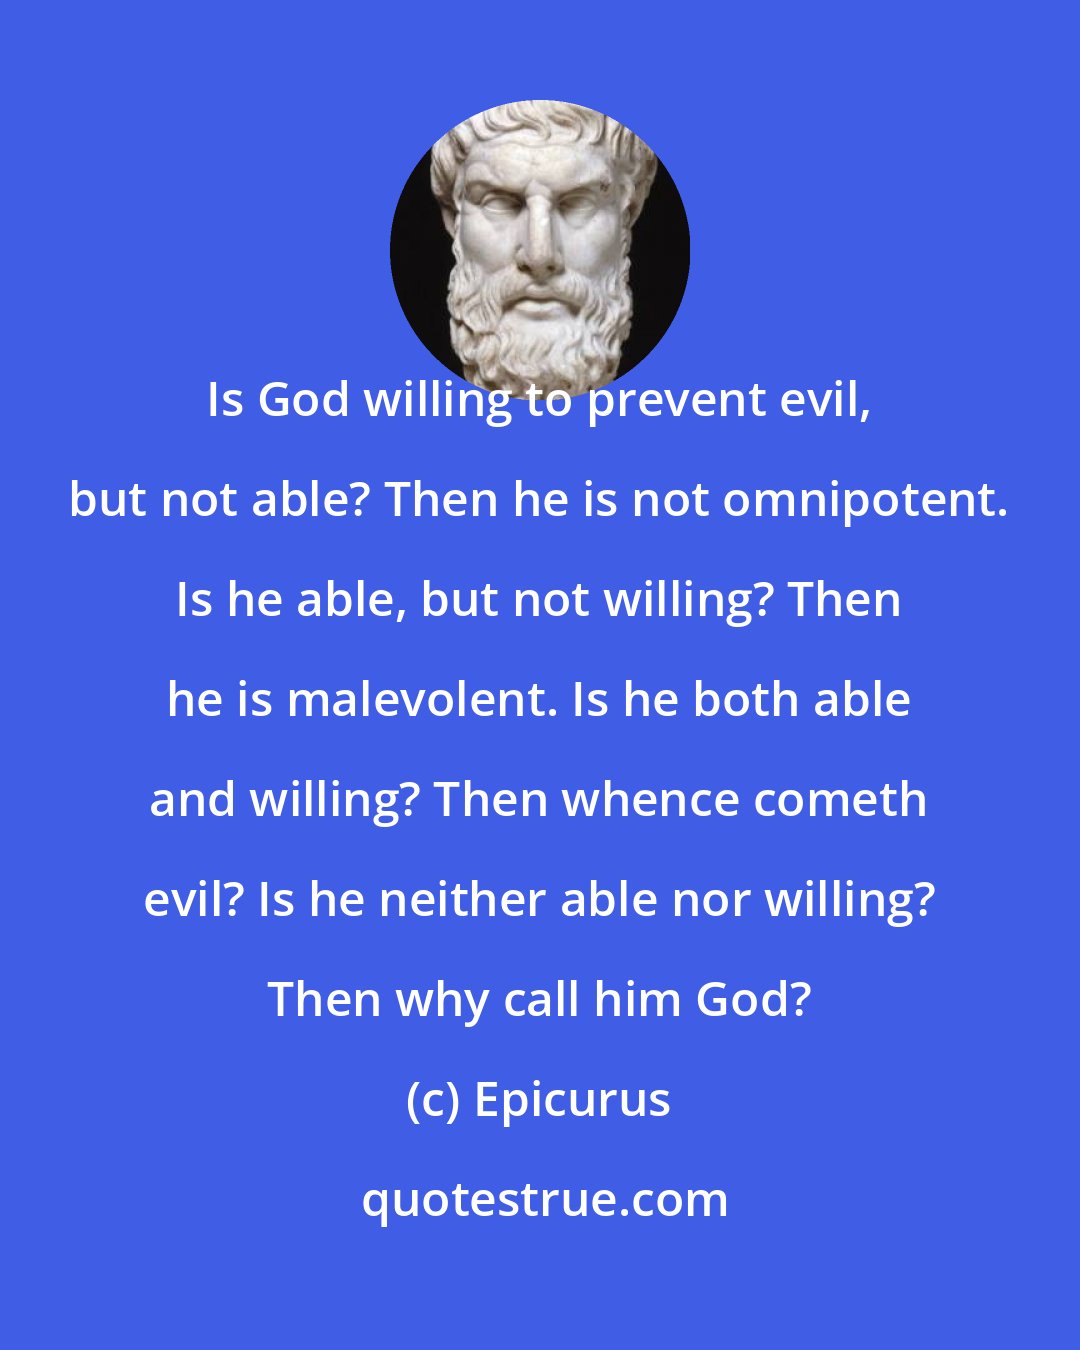 Epicurus: Is God willing to prevent evil, but not able? Then he is not omnipotent. Is he able, but not willing? Then he is malevolent. Is he both able and willing? Then whence cometh evil? Is he neither able nor willing? Then why call him God?